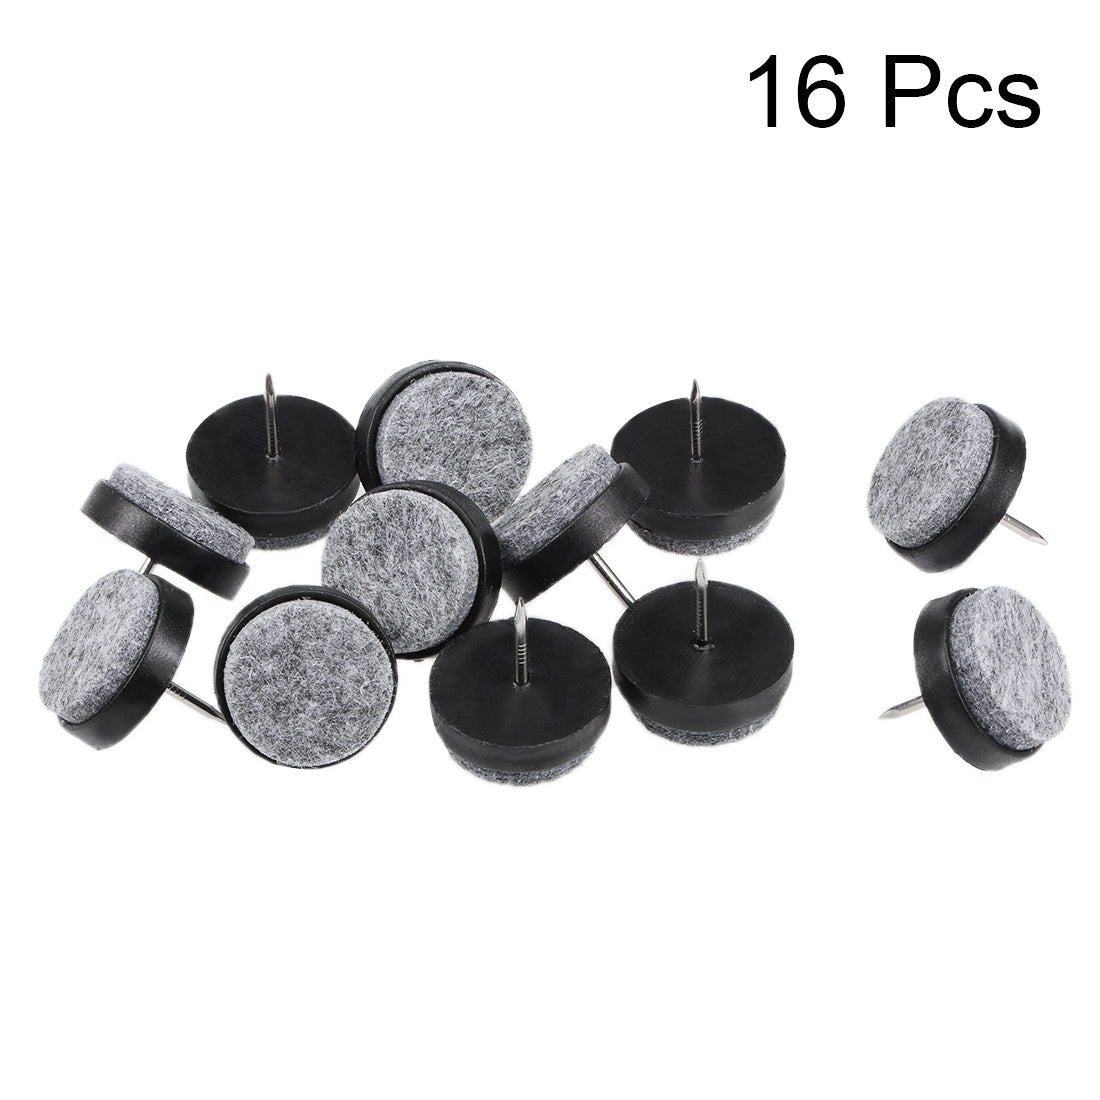 uxcell Uxcell Nail On Furniture Felt Pads Glide Chair Table Leg Protector 24mm Dia Black 16pcs